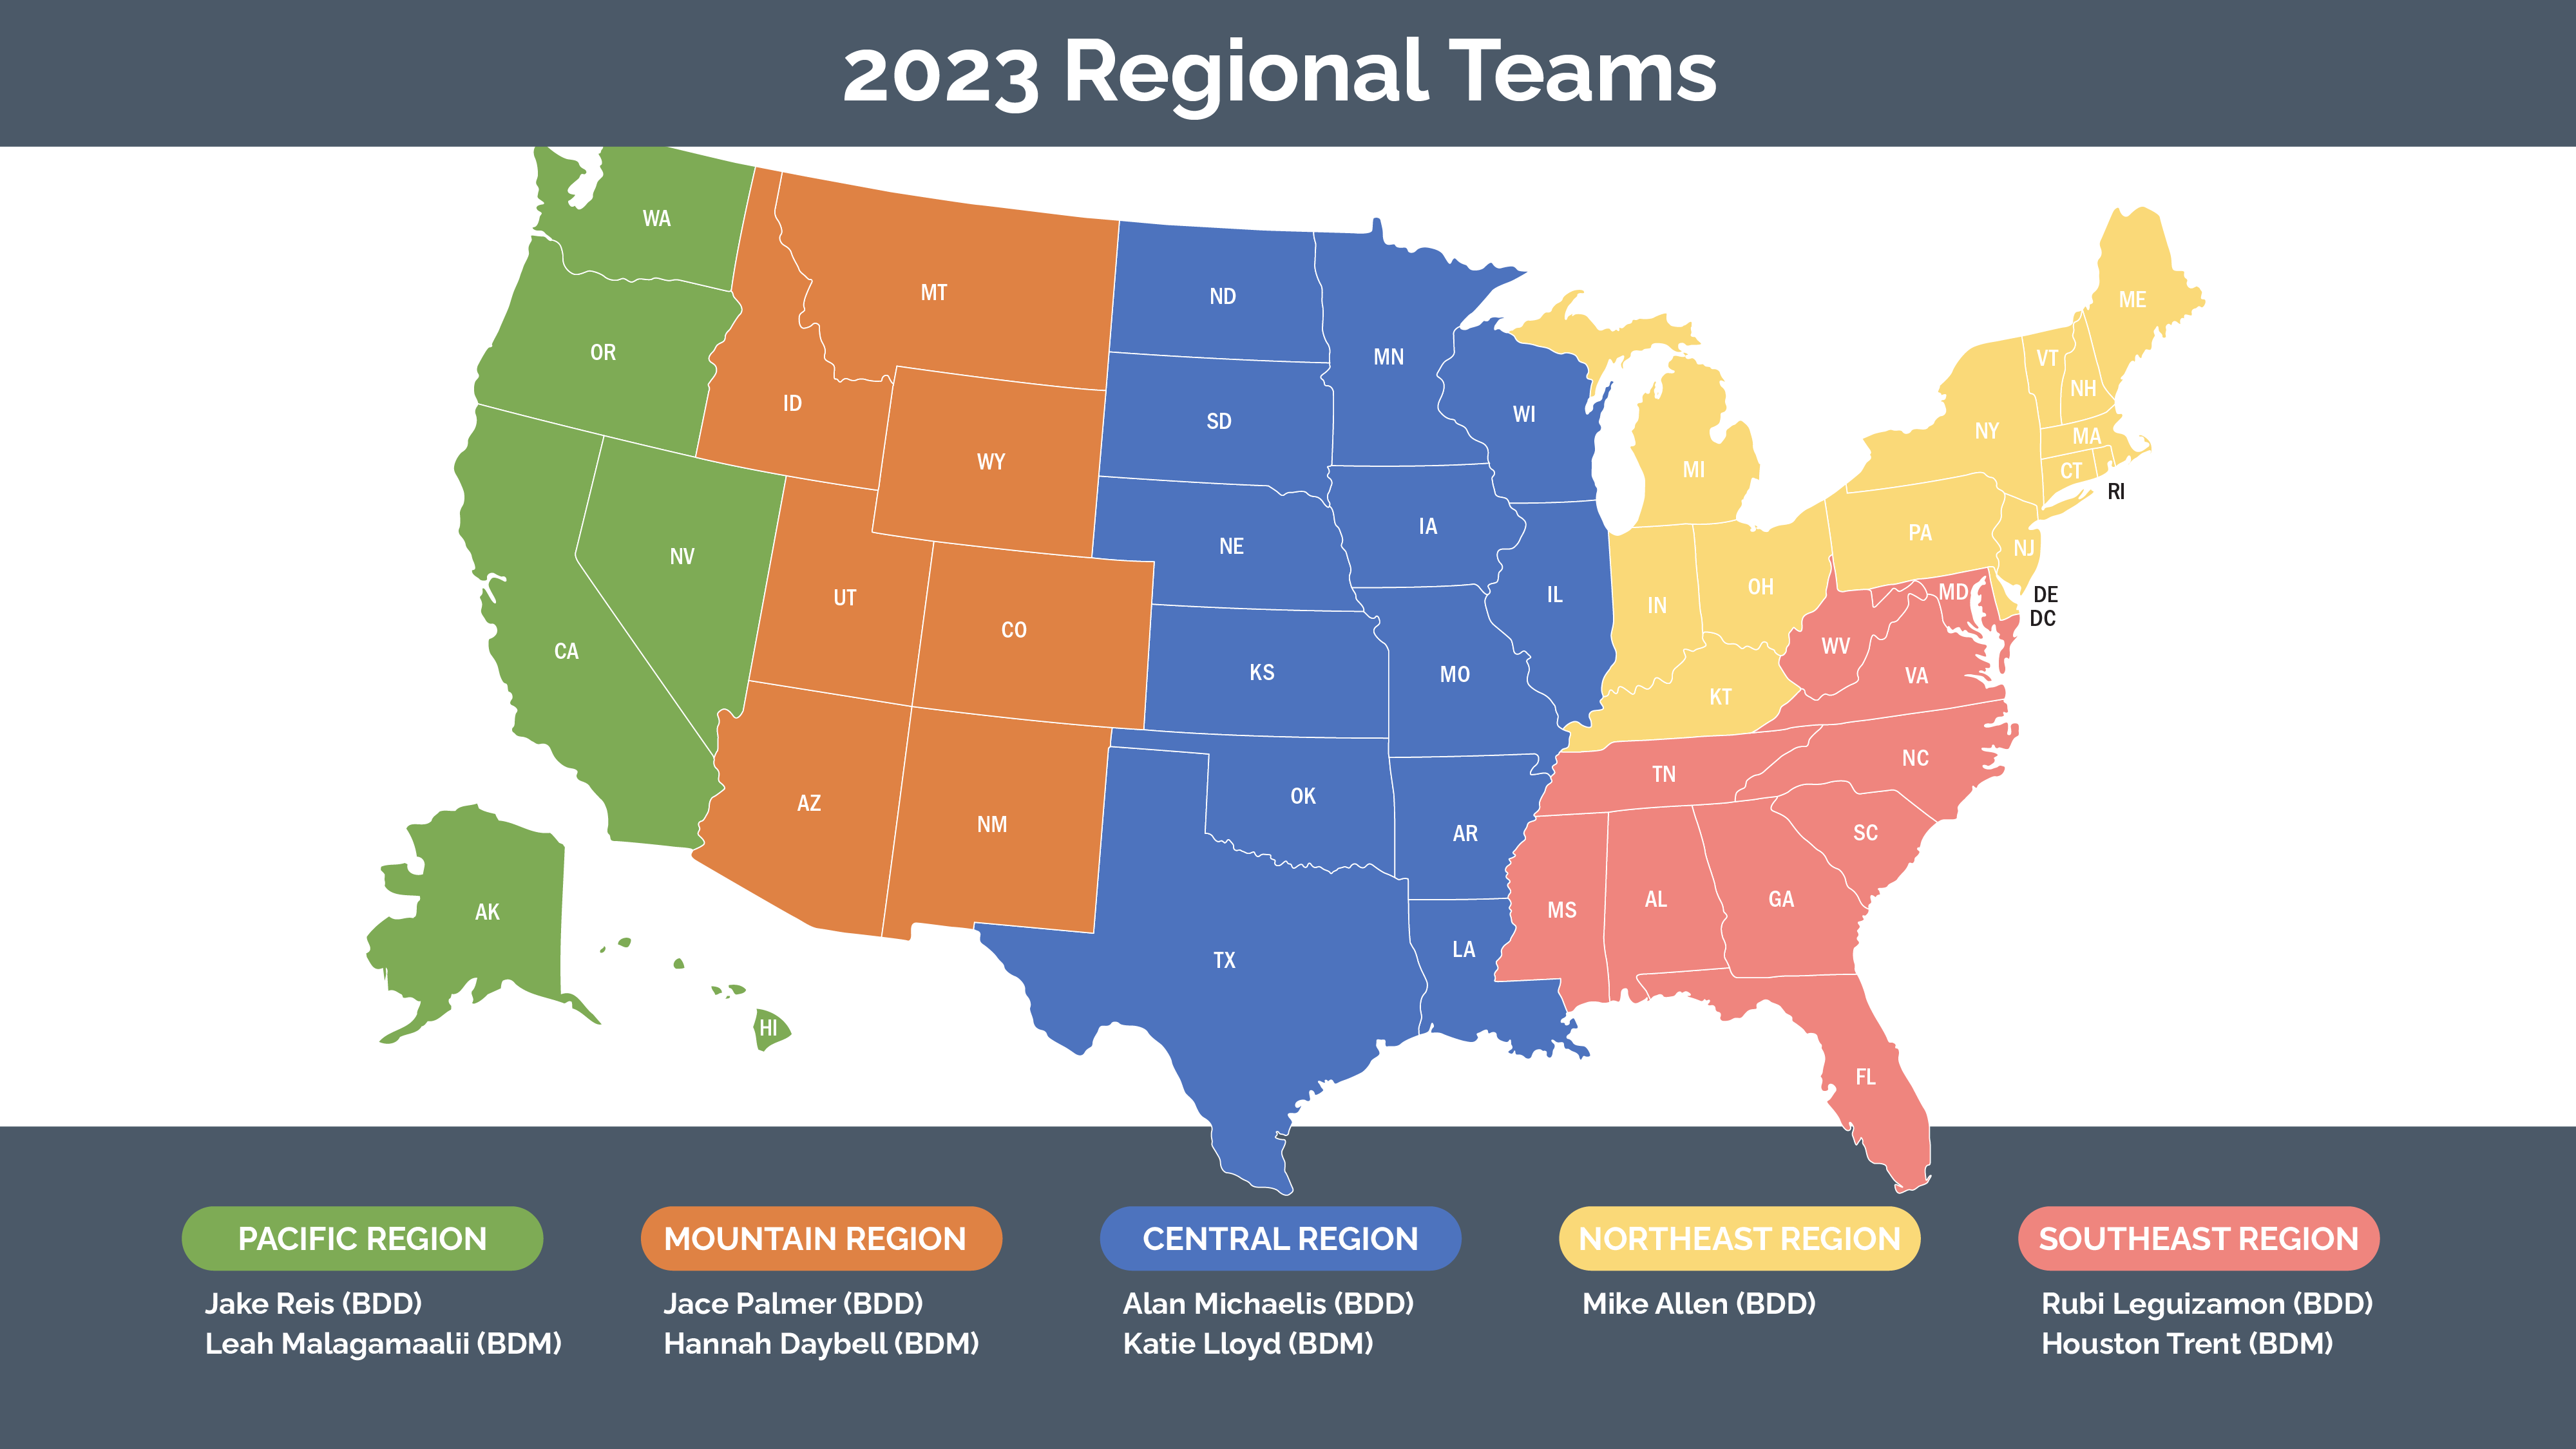 Map of the US divided into regions according to Account Management Team